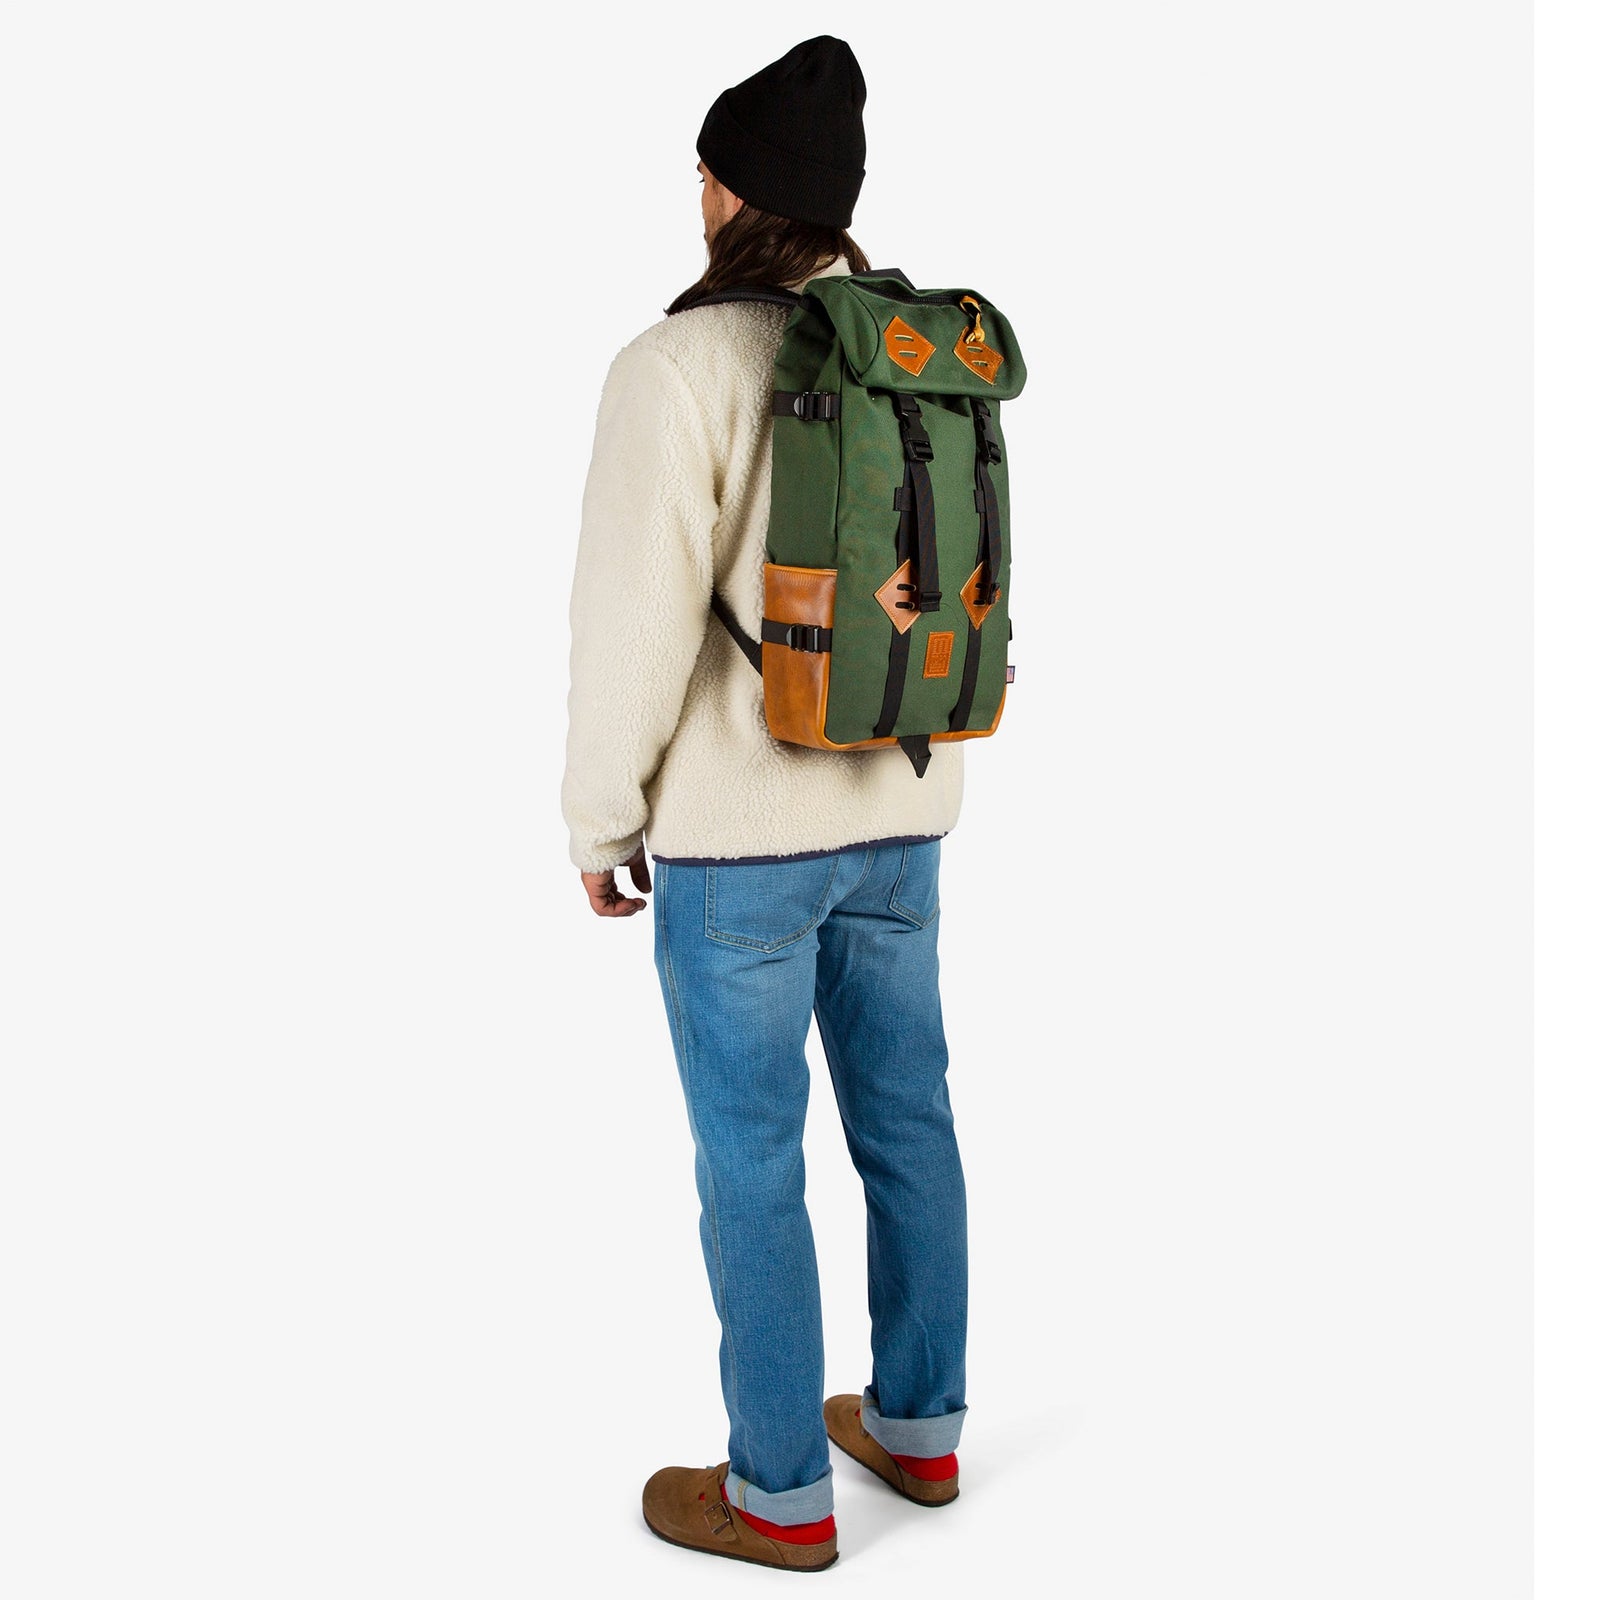 General shot of Topo Designs Klettersack Heritage Canvas backpack in Olive green Canvas / Brown Leather on model.